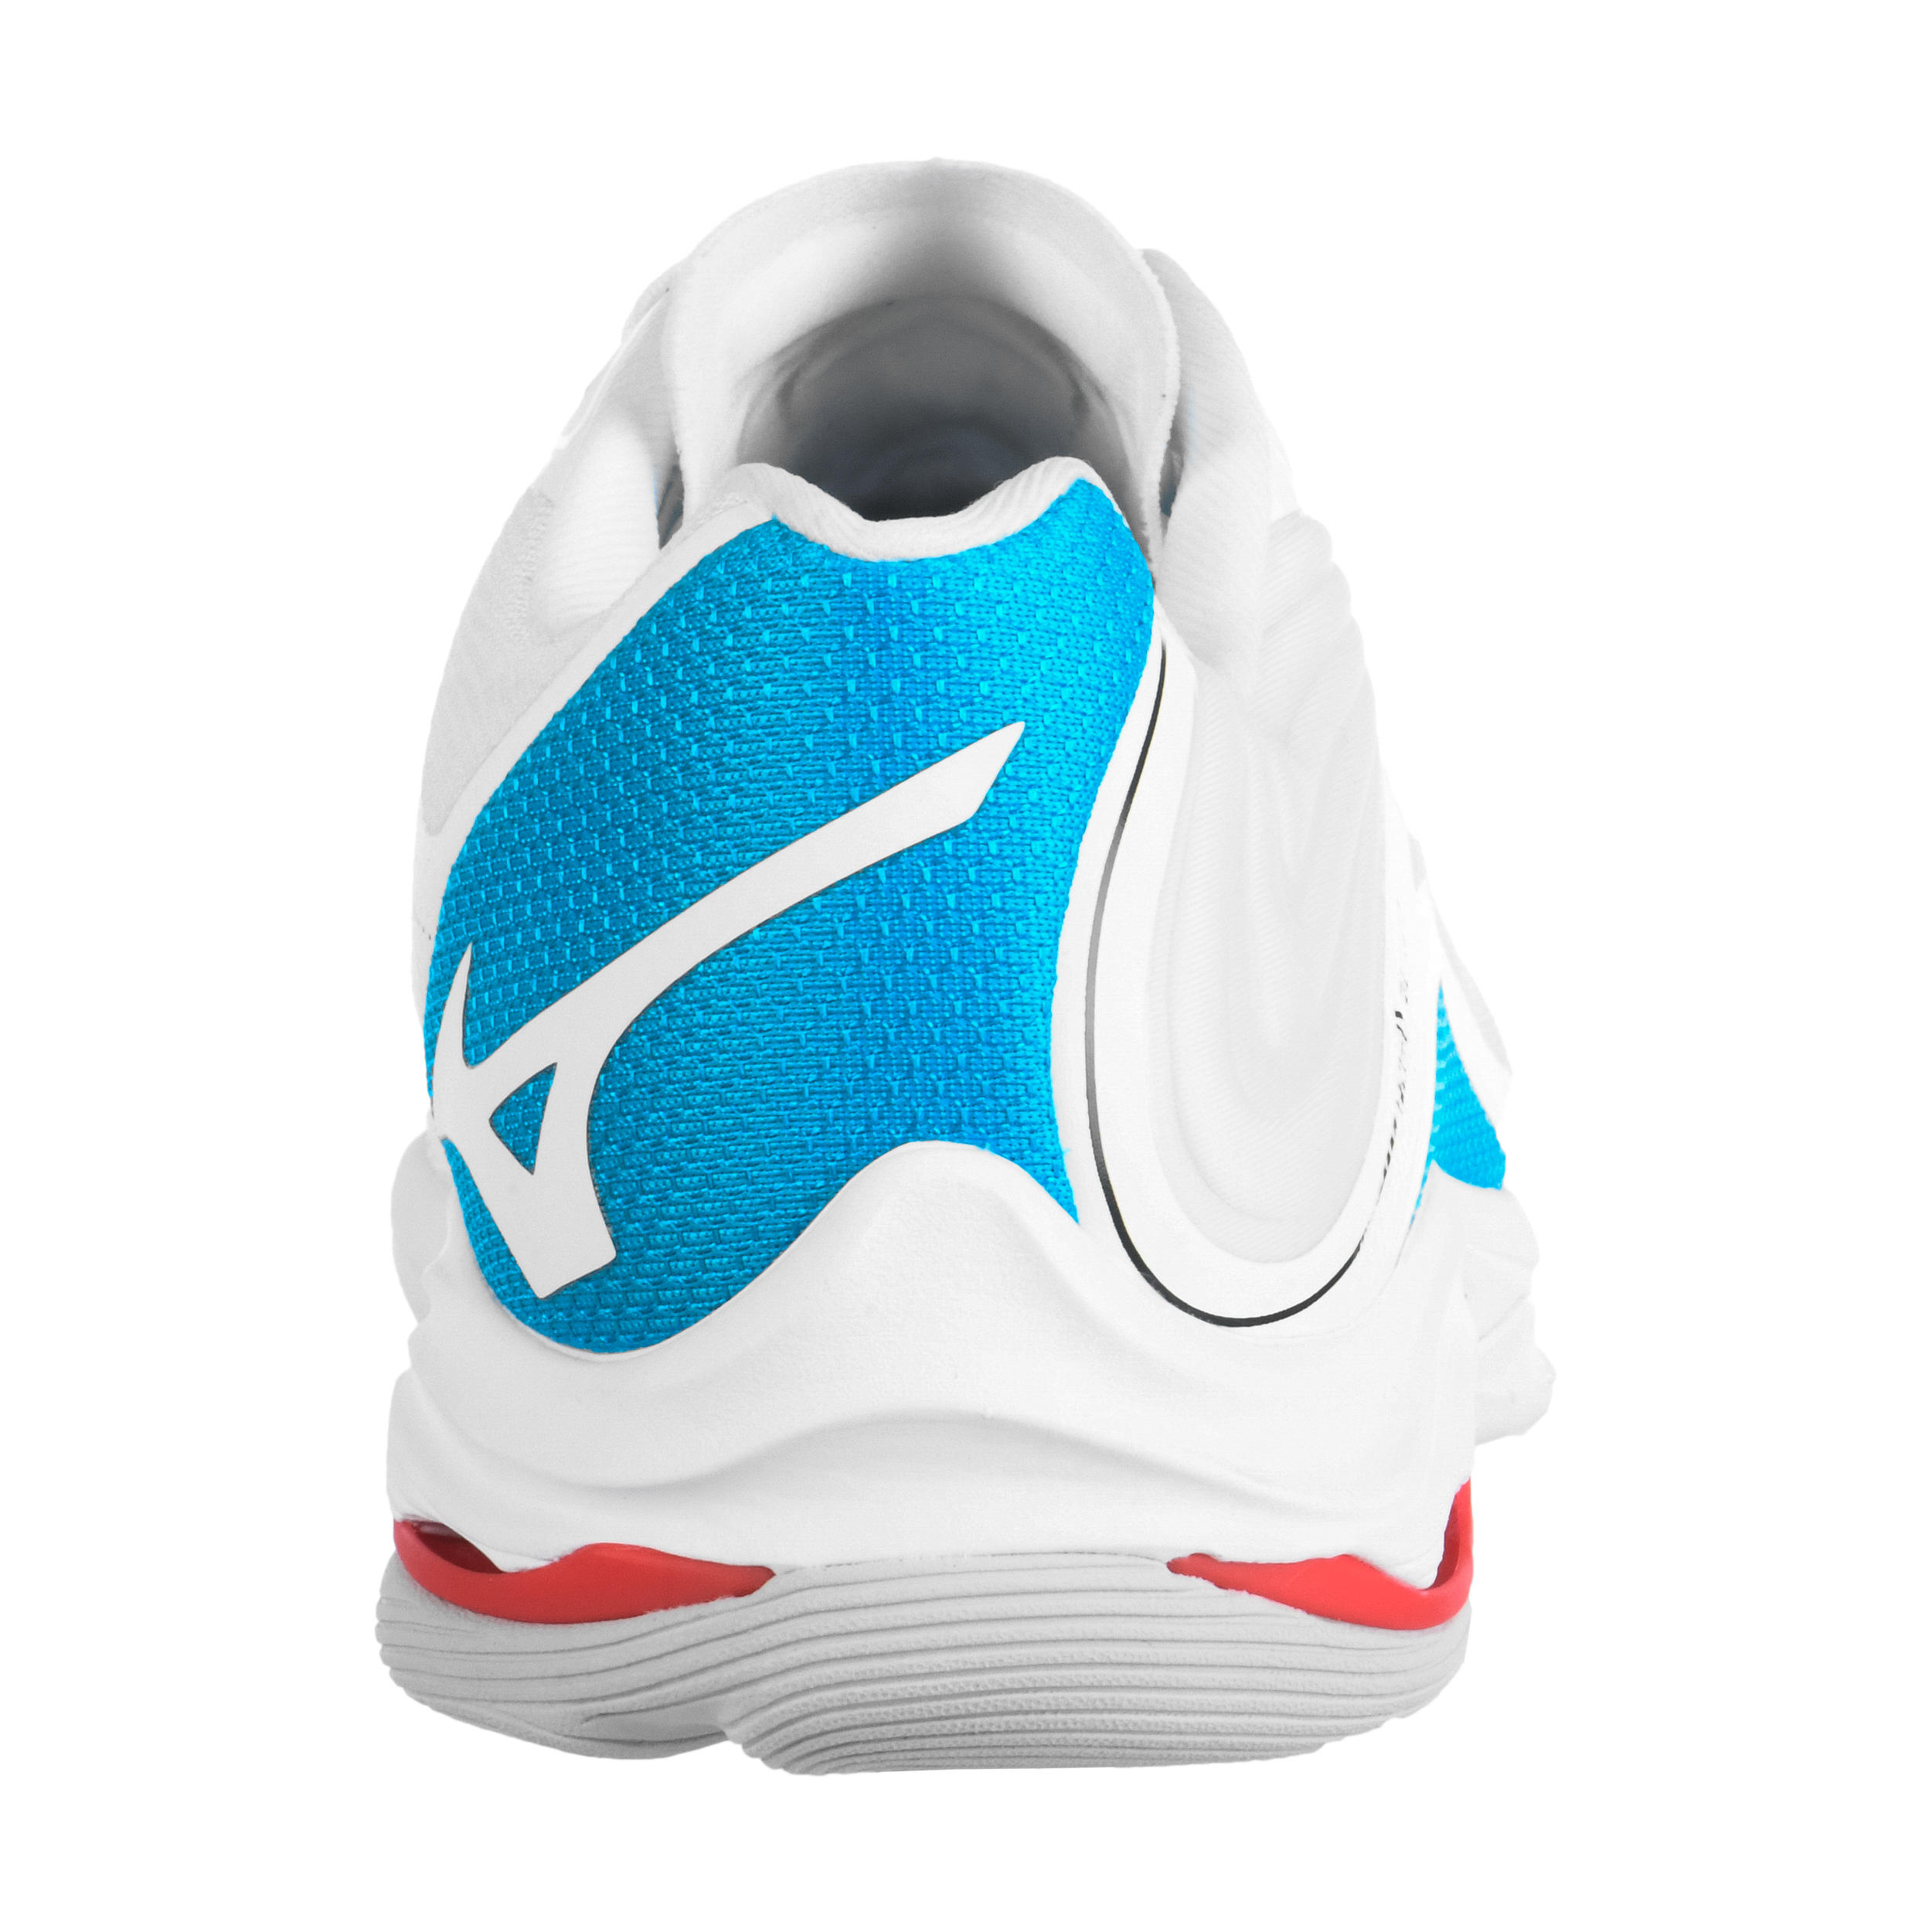 Men's Volleyball Shoes Lightning Z6 - White 6/8